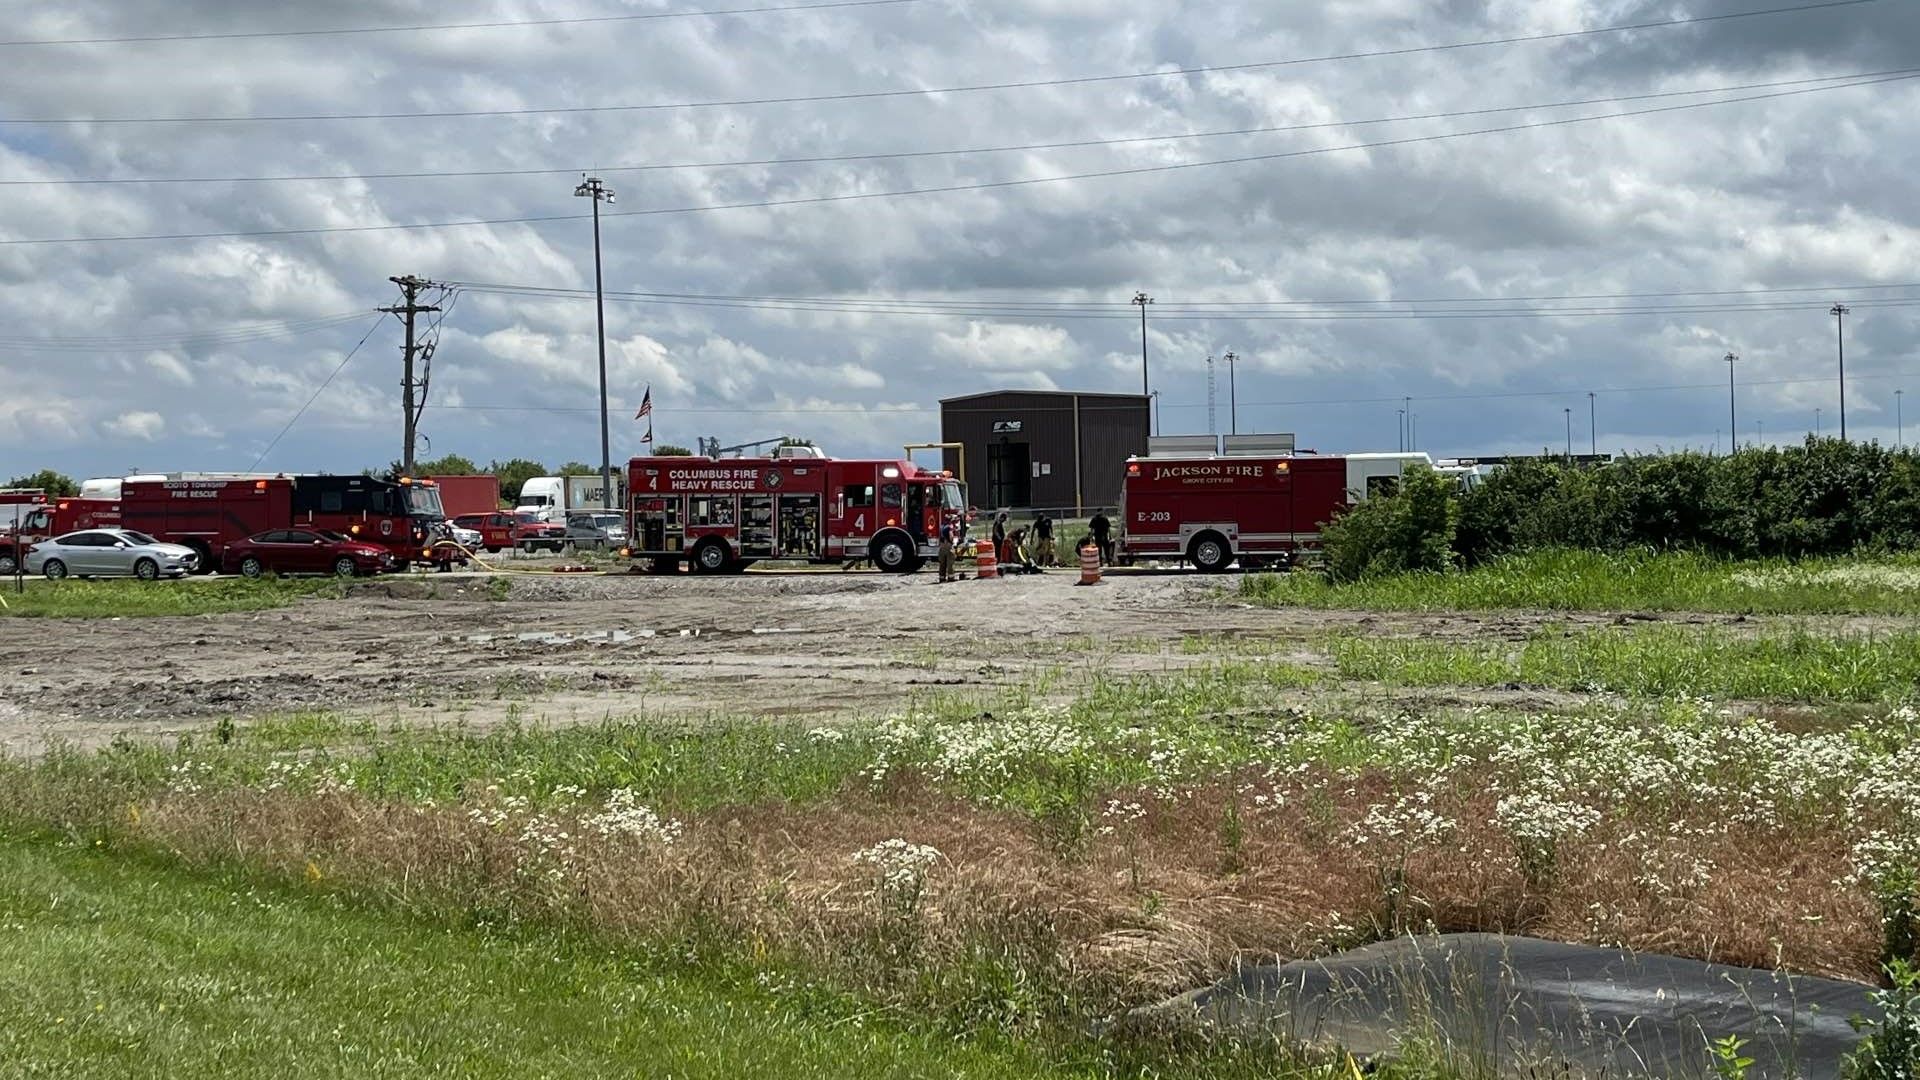 The Harrison Township Fire Department says the man was working in a manhole on Thoroughbred Drive around 12:30 p.m.